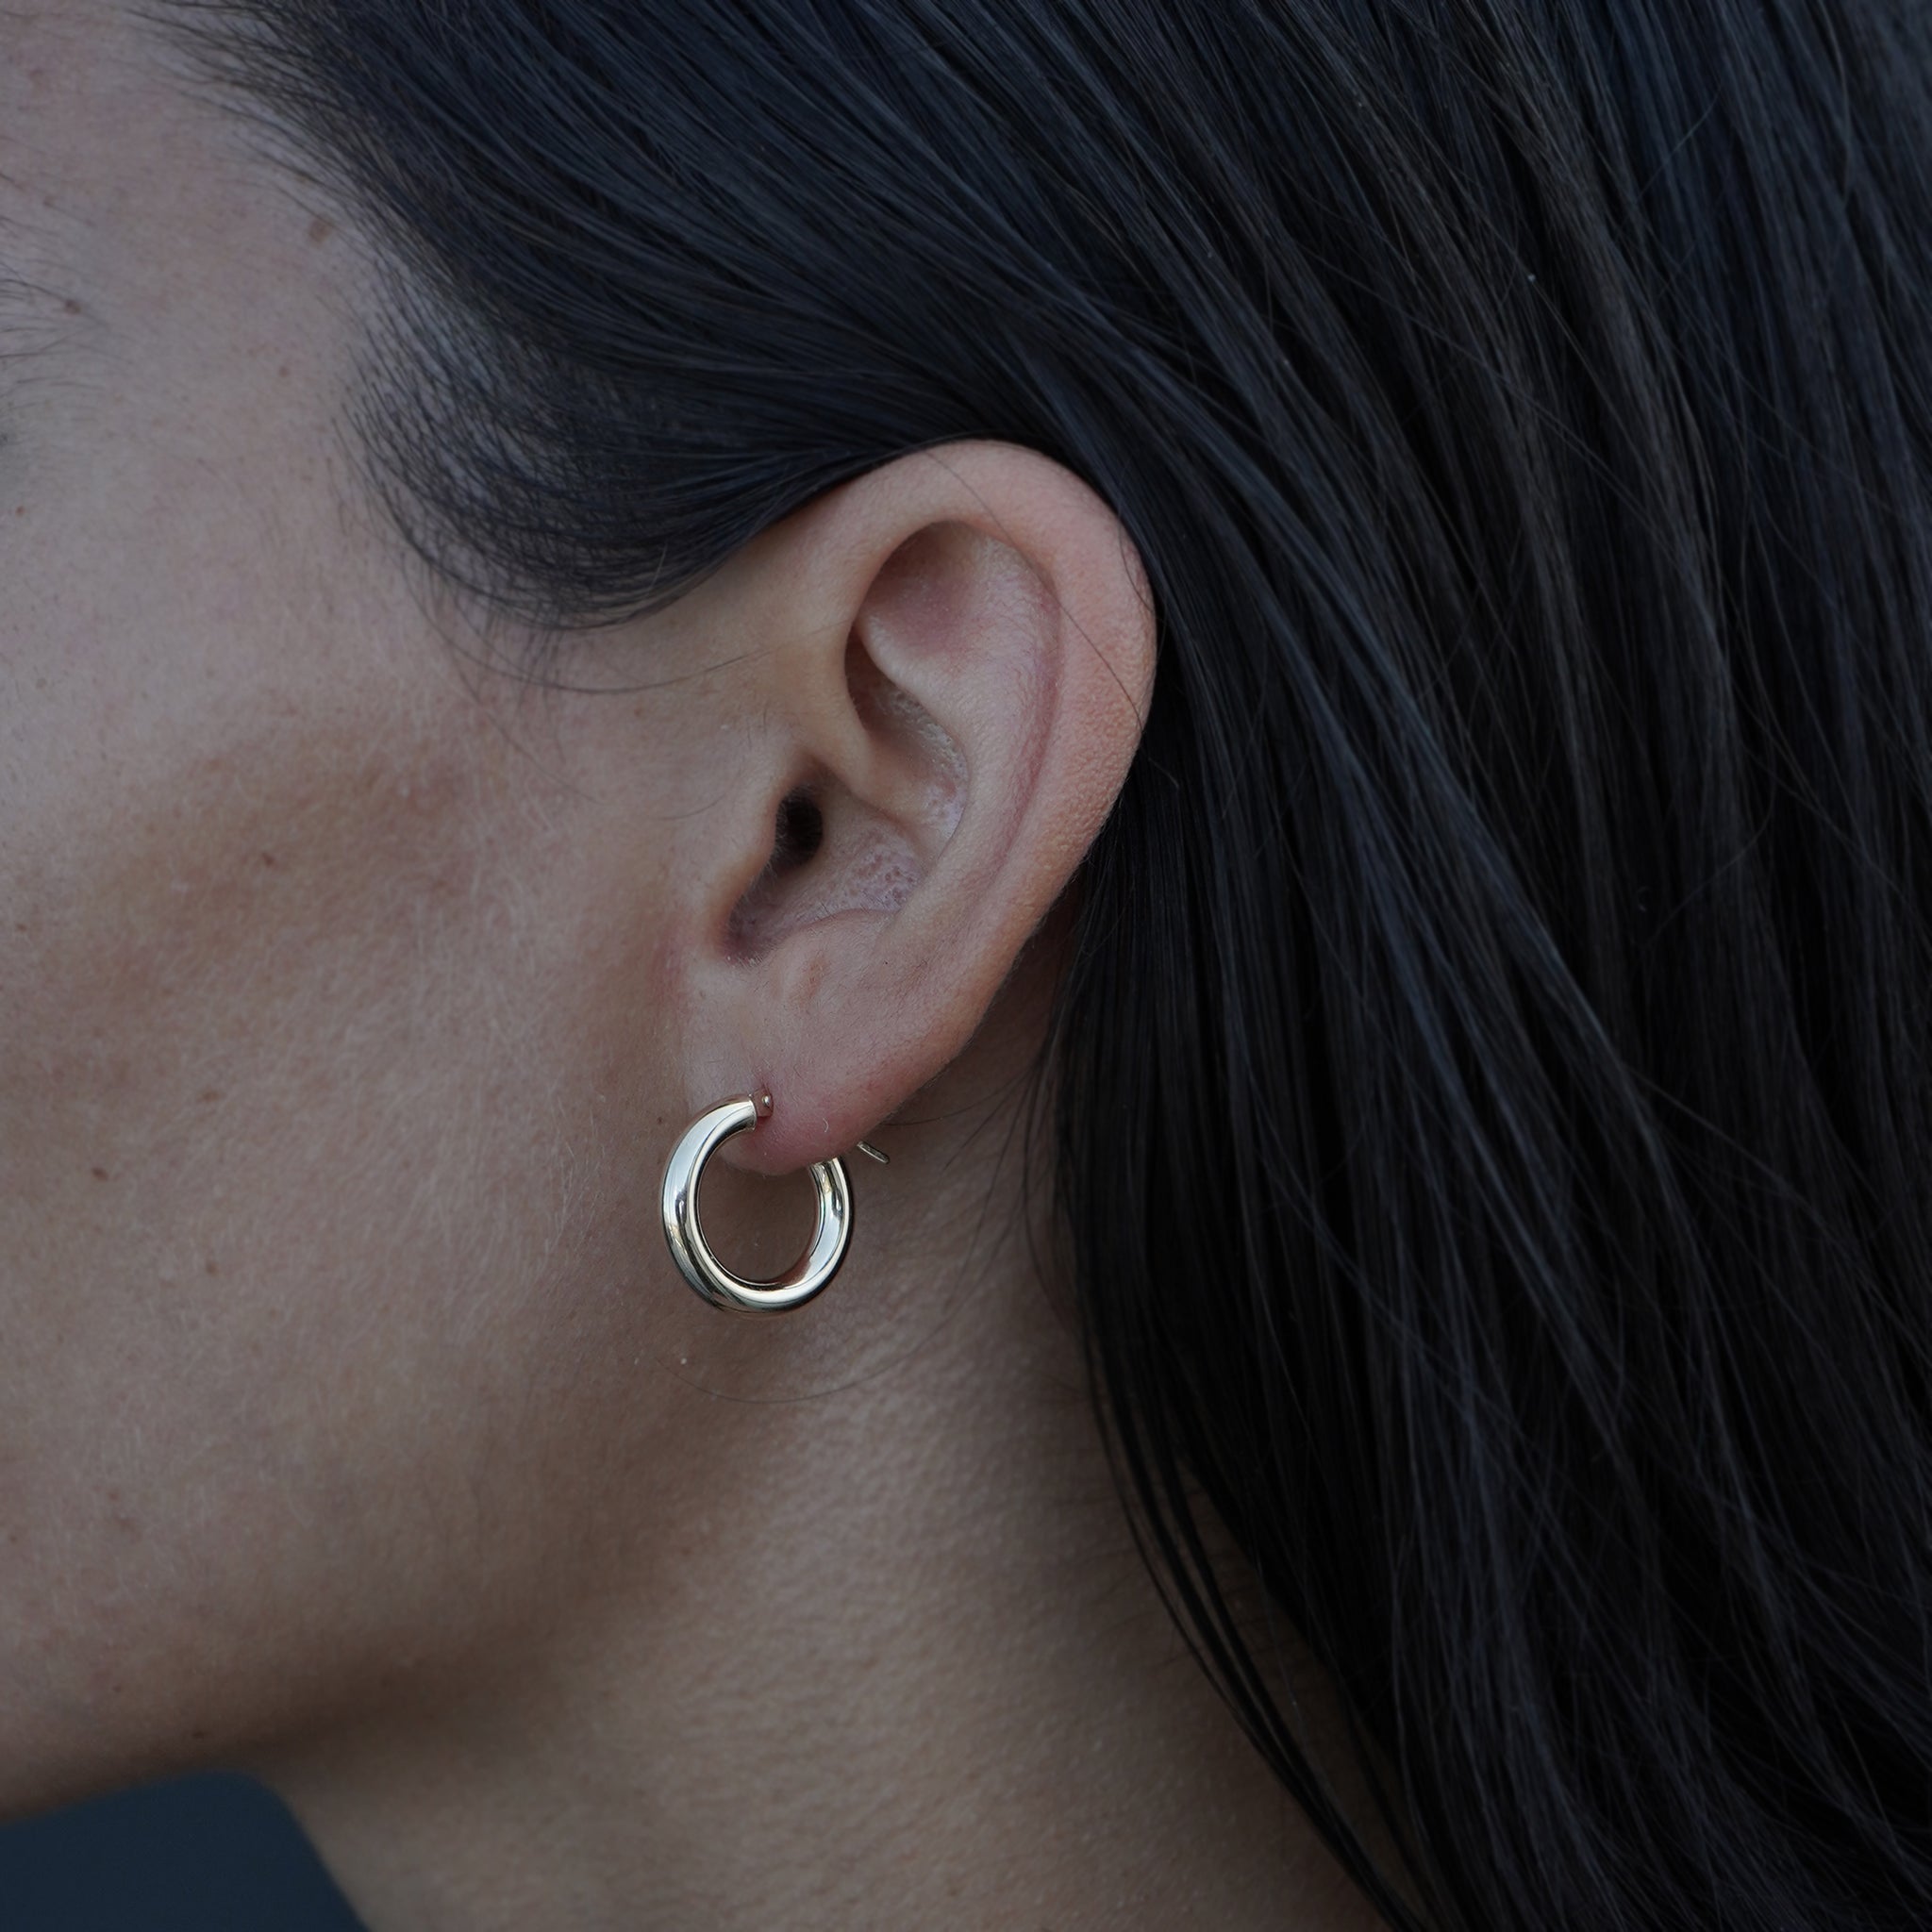 14K yellow gold earrings from Lico Jewelry, featuring a model wearing the hoops